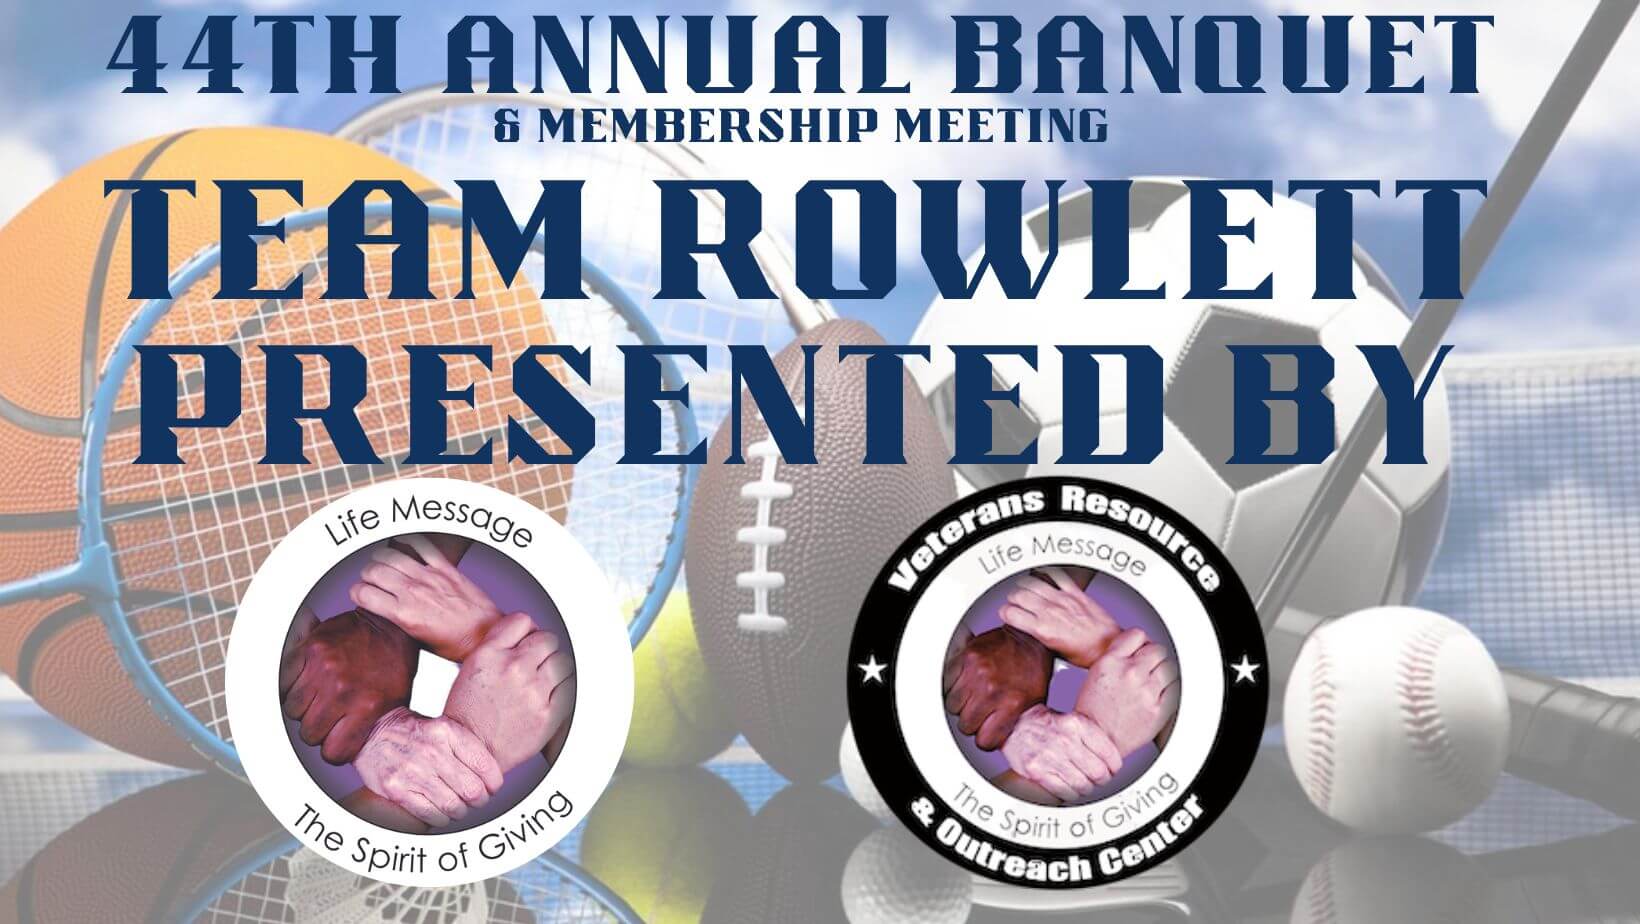 44th Annual Banquet Title Spnsor Facebook Cover